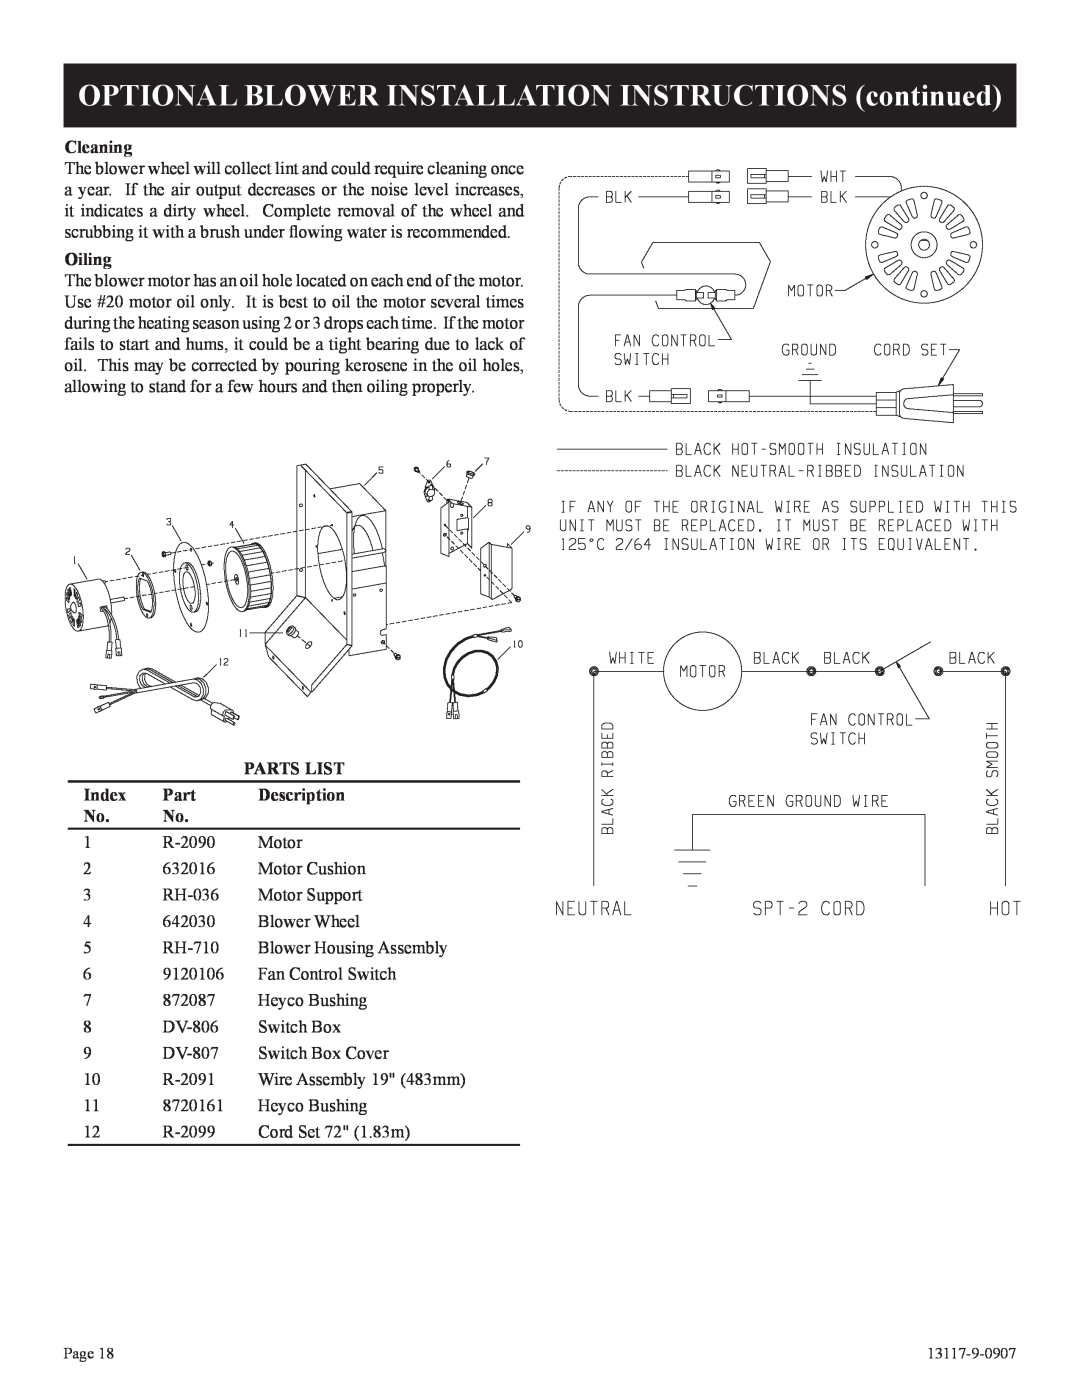 Empire Products DV-35T-1, DV-25T-1 installation instructions Cleaning, Oiling, Parts List, Index, Description, R-2090, Motor 